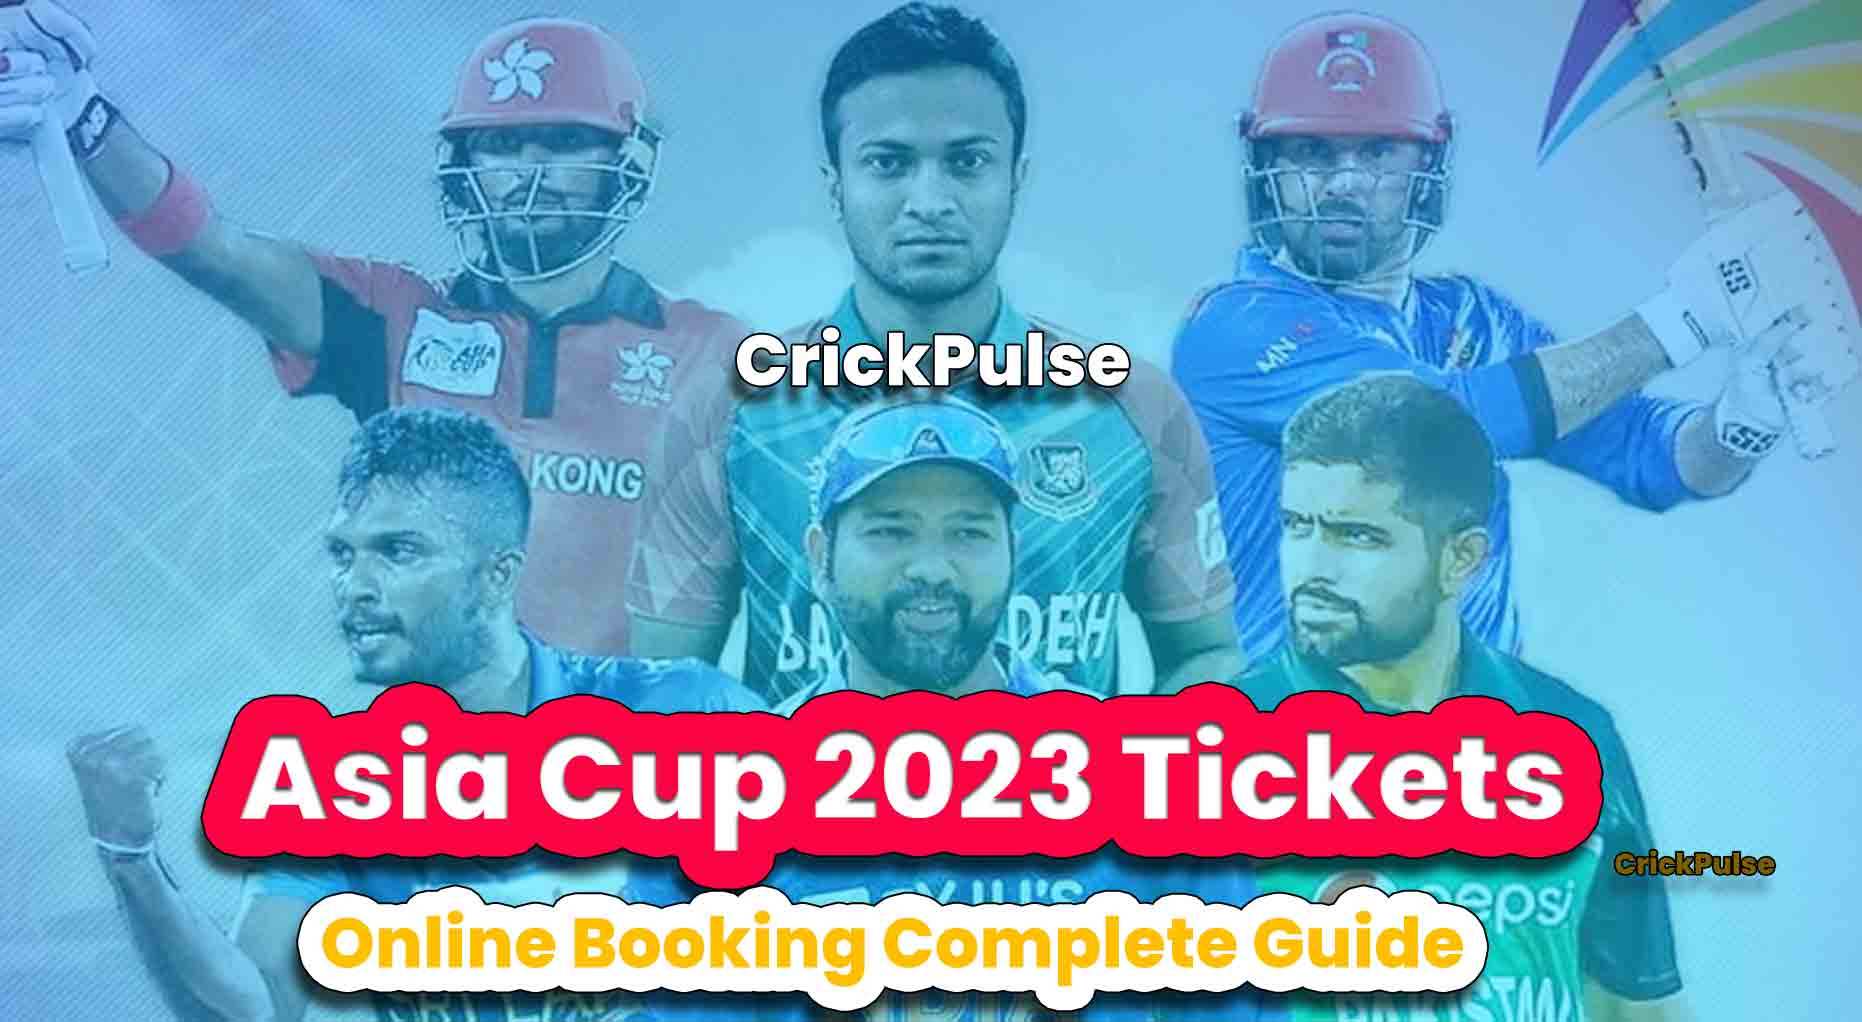 featured-img-Asia-Cup-2023-Tickets-Online-Booking-Complete-Tickets-Guide-crickpulse